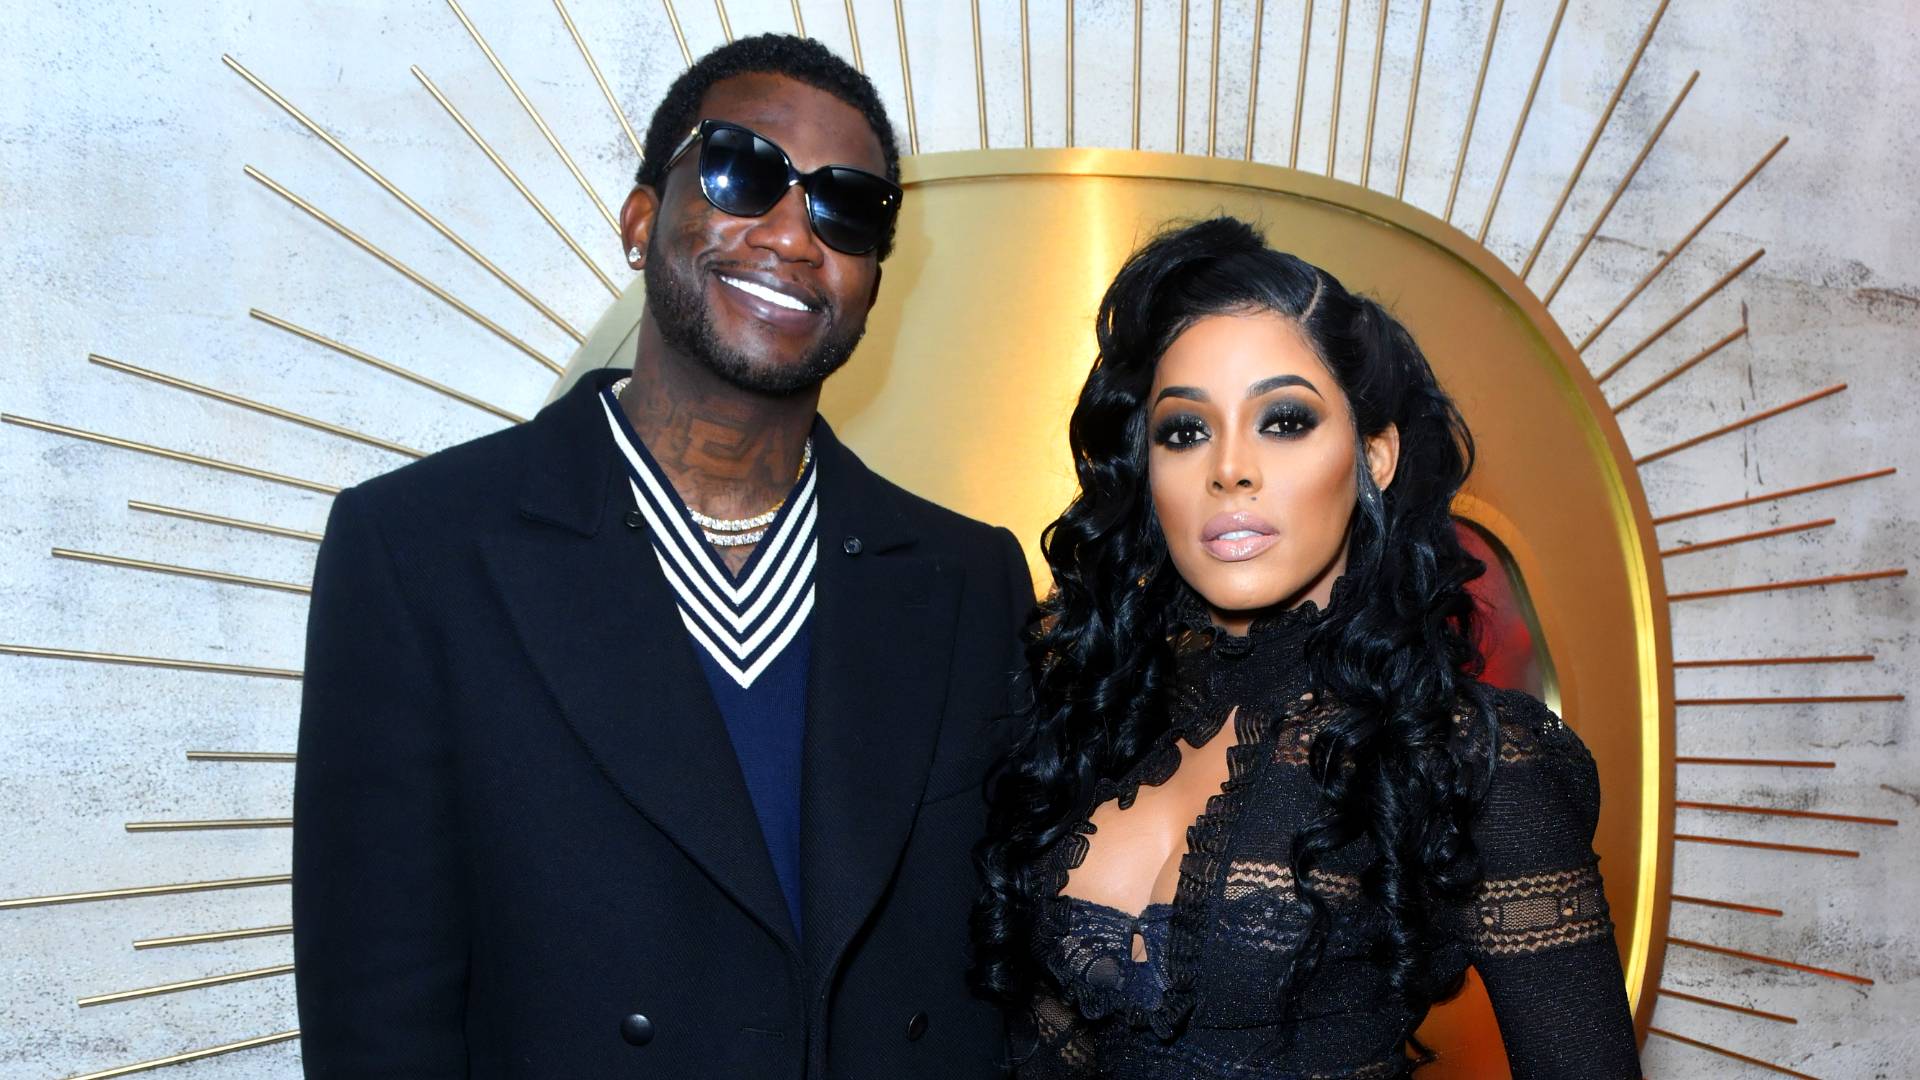  Gucci Mane (L) and Keyshia Ka'Oir attend the Warner Music Group Pre-Grammy Party in association with V Magazine on January 25, 2018 in New York City. 